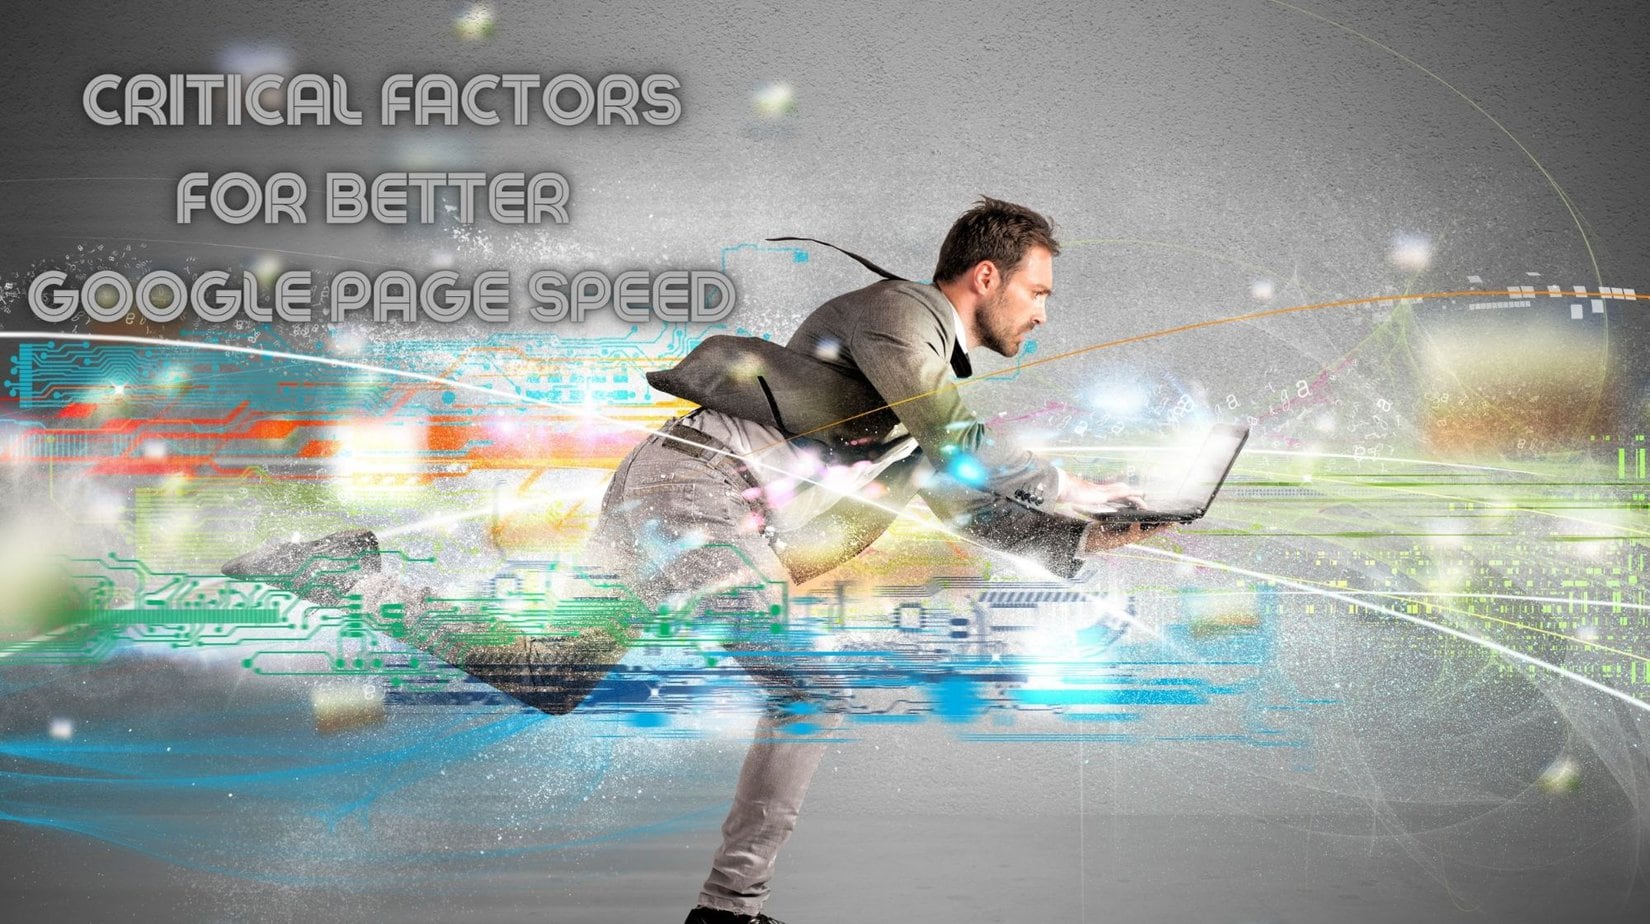 7 Critical Factors for better Google Page Speed (2)